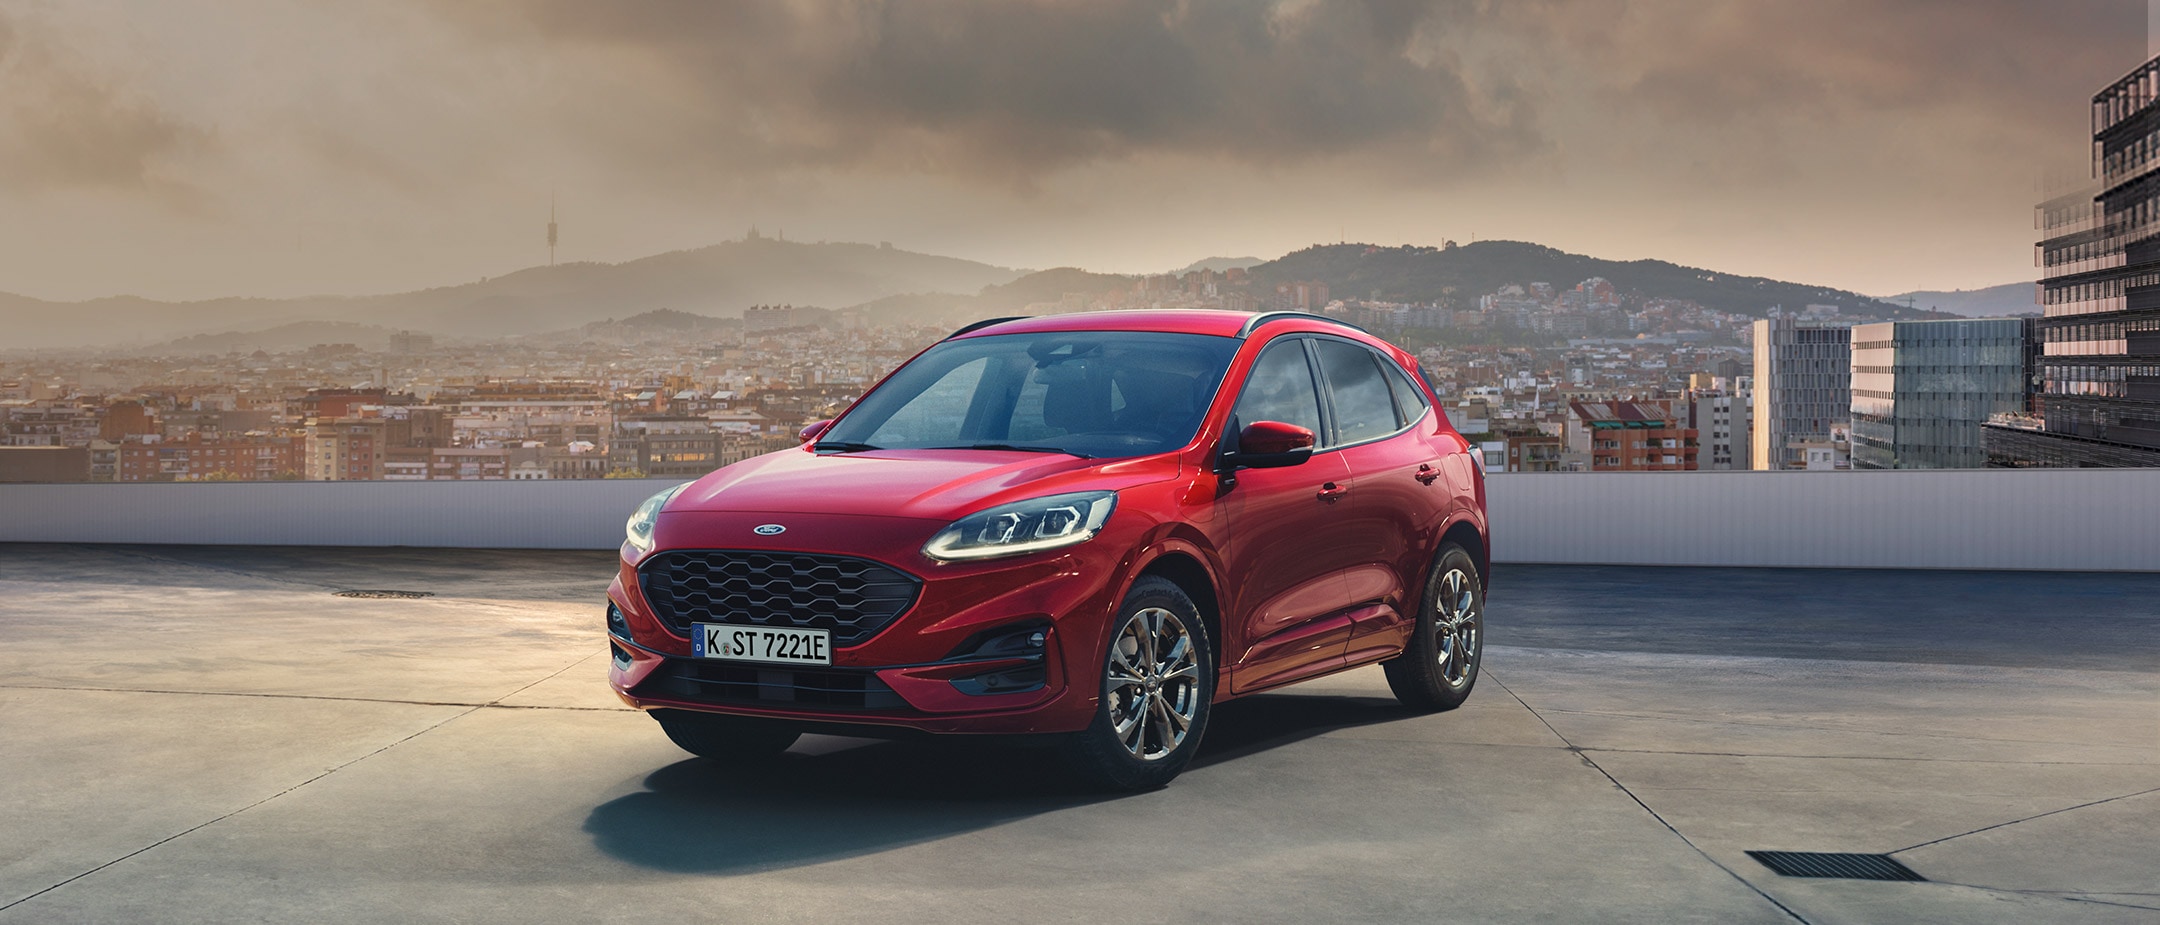 Ford Kuga in Rot steht